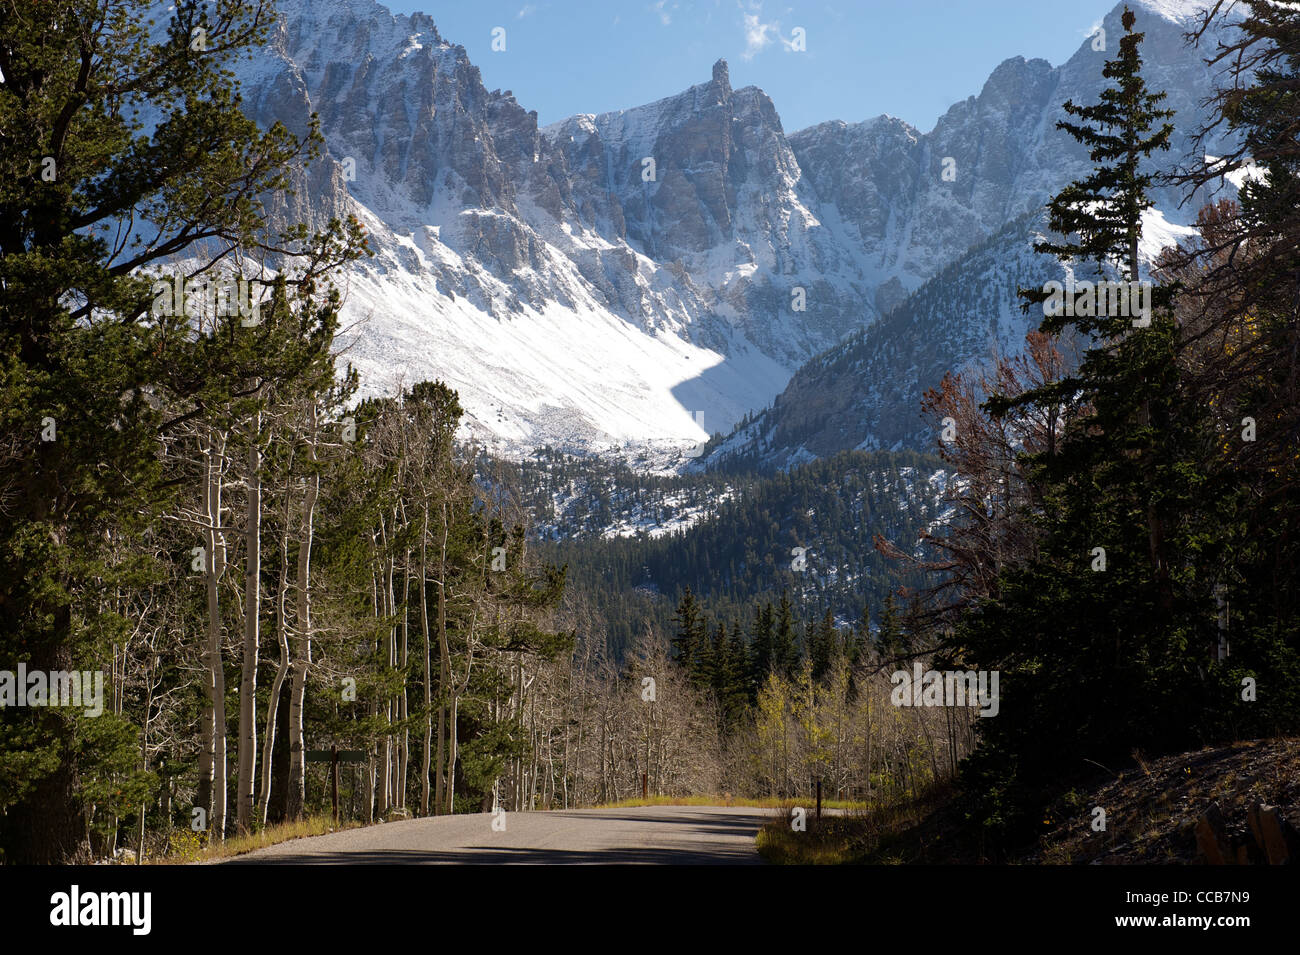 Wheeler Peak: mountain with snow, and park road in foreground, Great Basin National Park, E Nevada, US Stock Photo